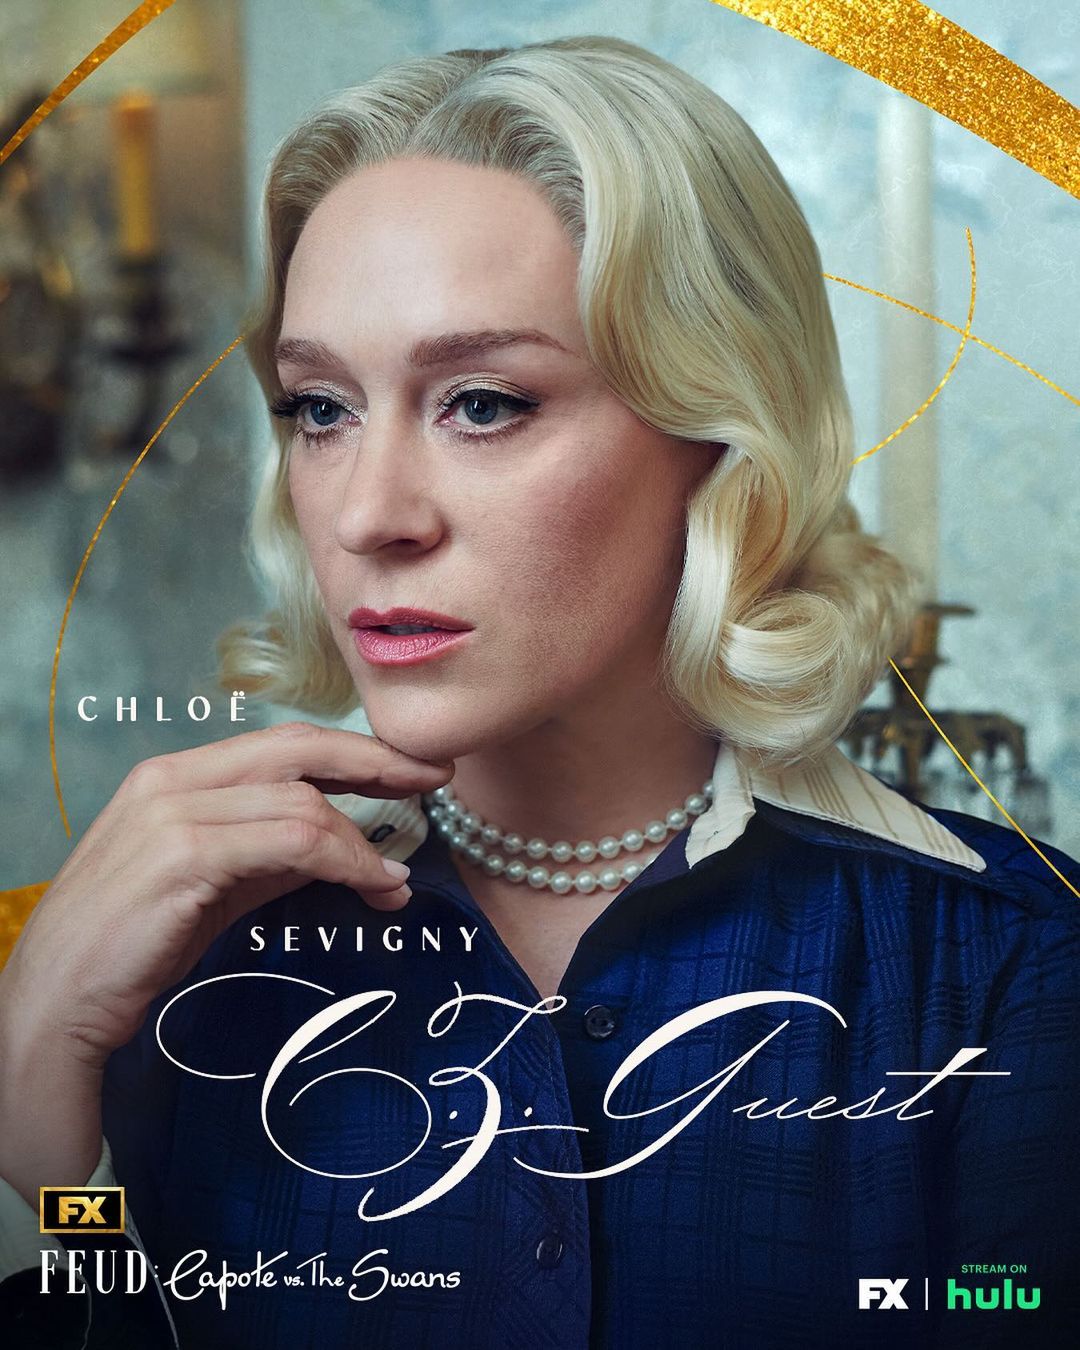 Chloë Sevigny plays C.Z. Guest in "FEUD: Capote vs. The Swans"